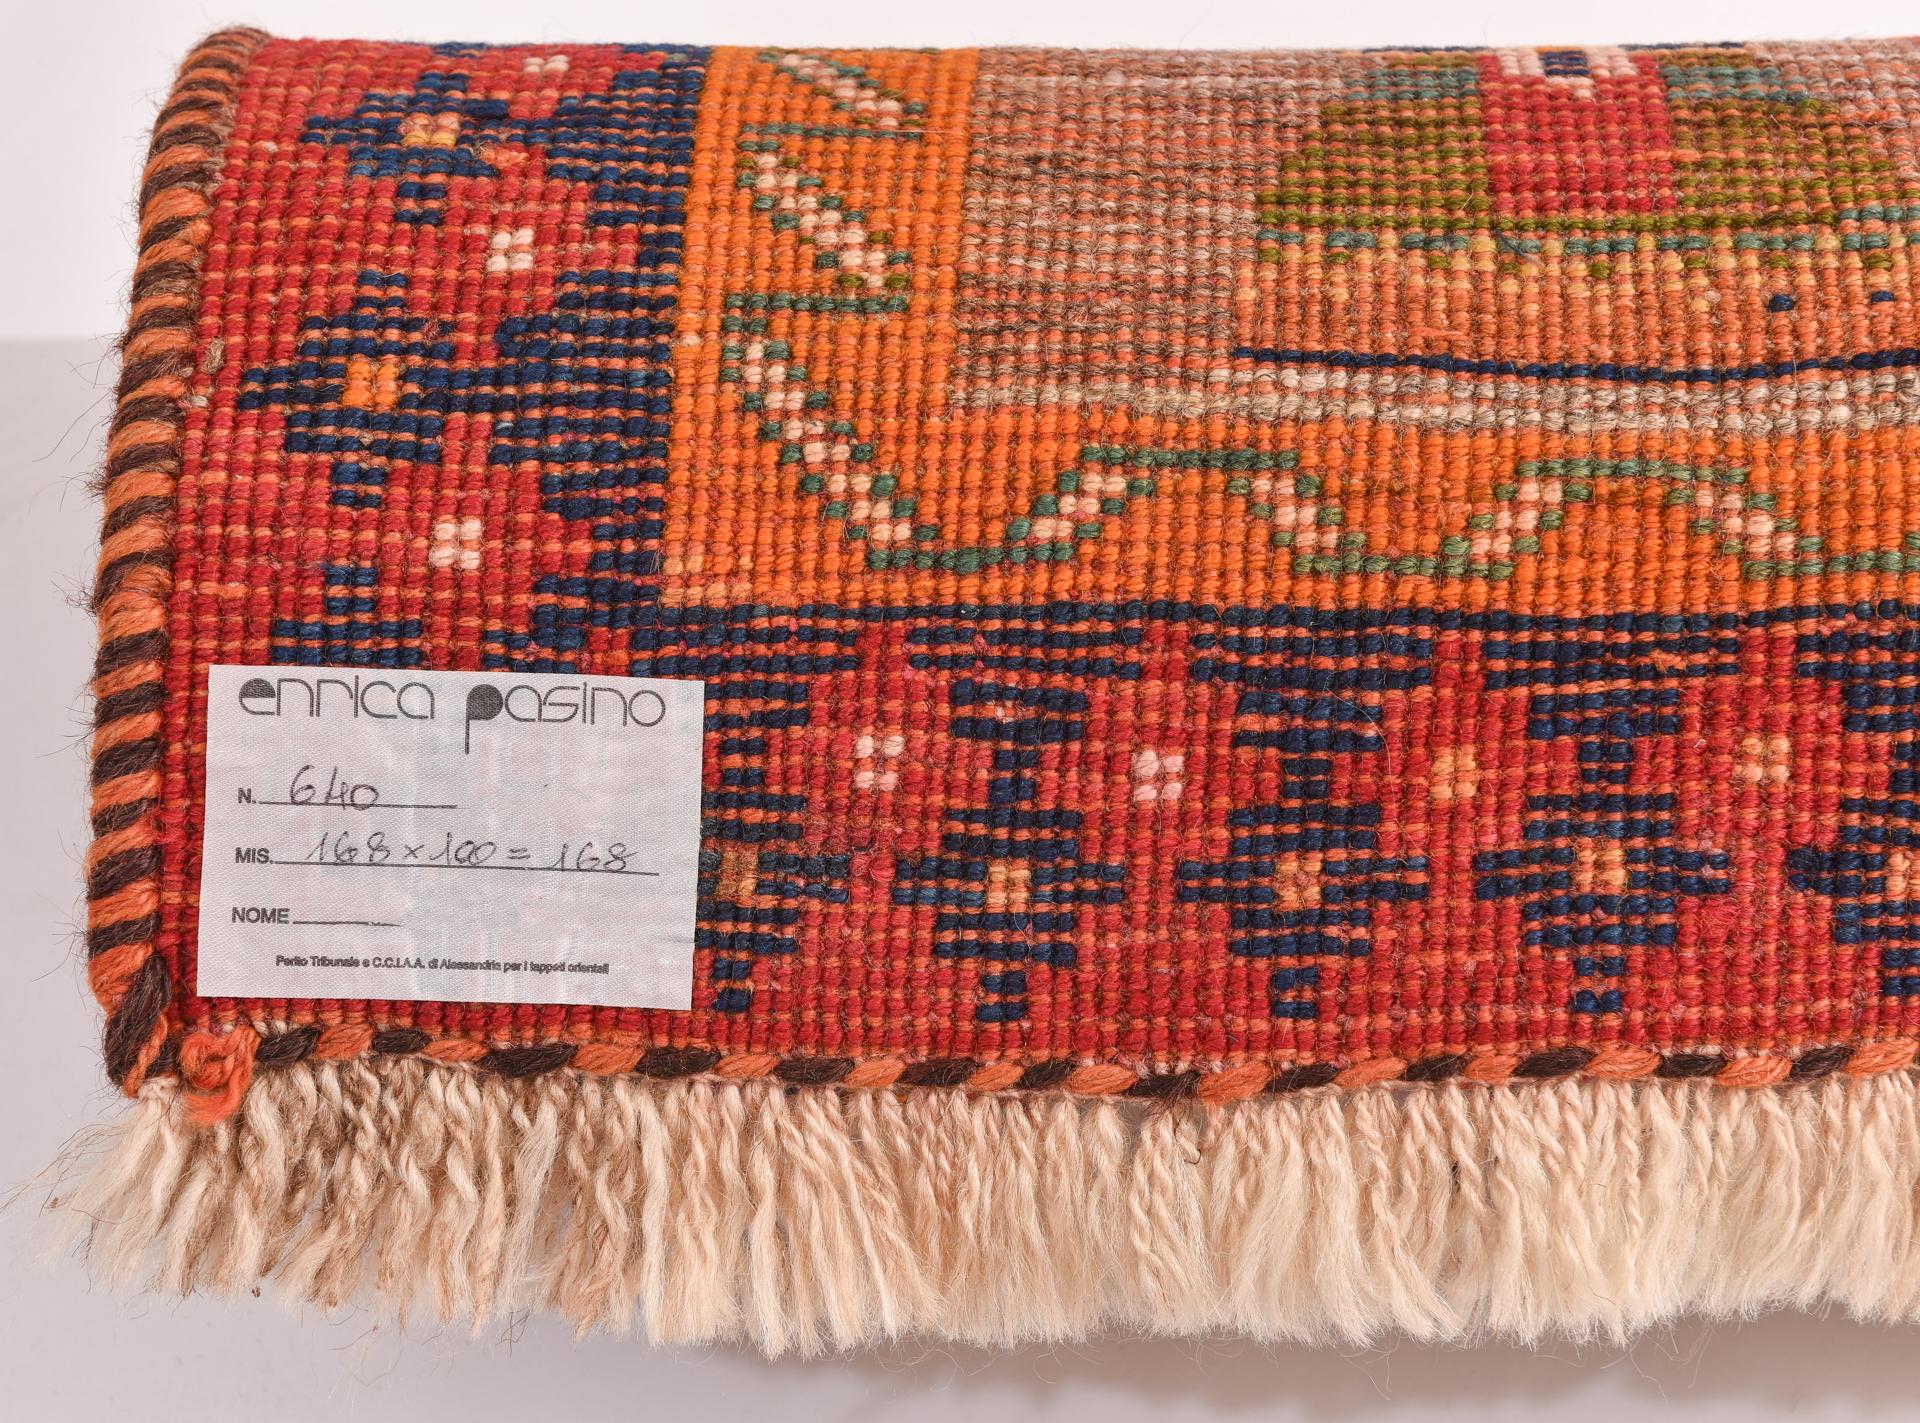 nr. 640 -  Private Collection ----------------------
The background of the carpet is in the natural écru color of thew wool, but the design is polychrome and very pleasant, with nomadic women in bright clothes dancing and three rows of birds